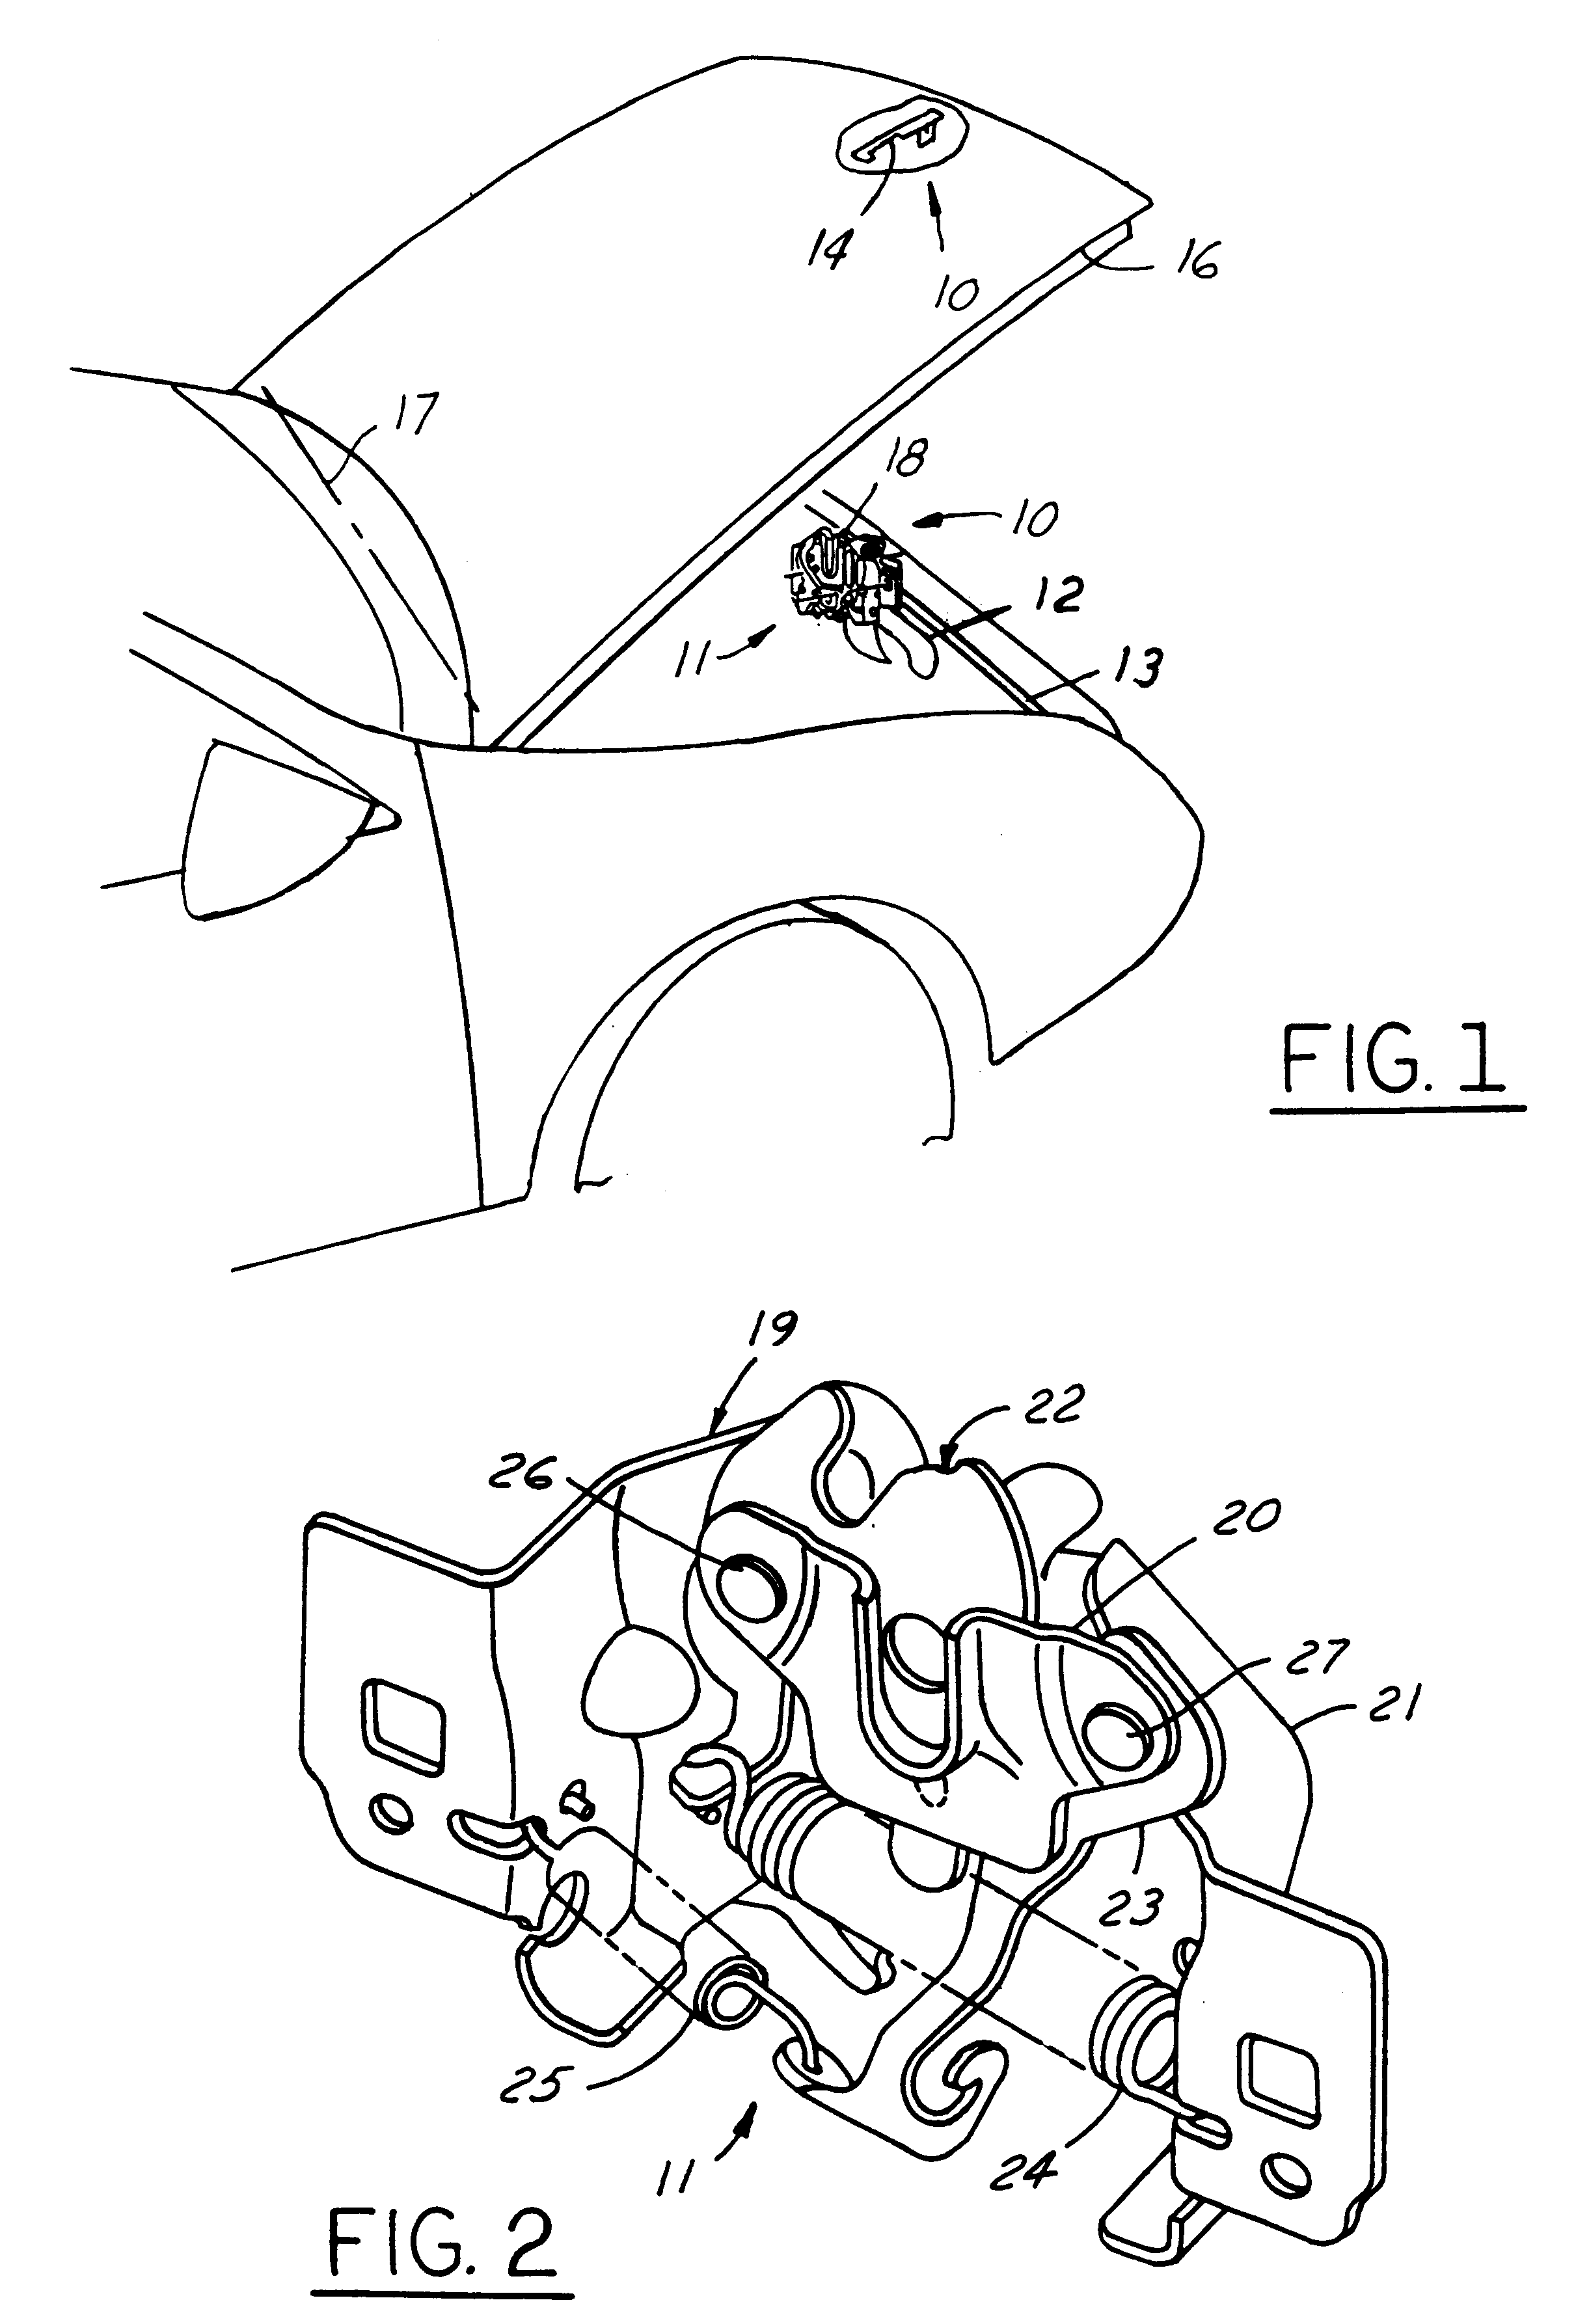 Resin-bonded solid-film-lubricant coated hood latch mechanism and method of making